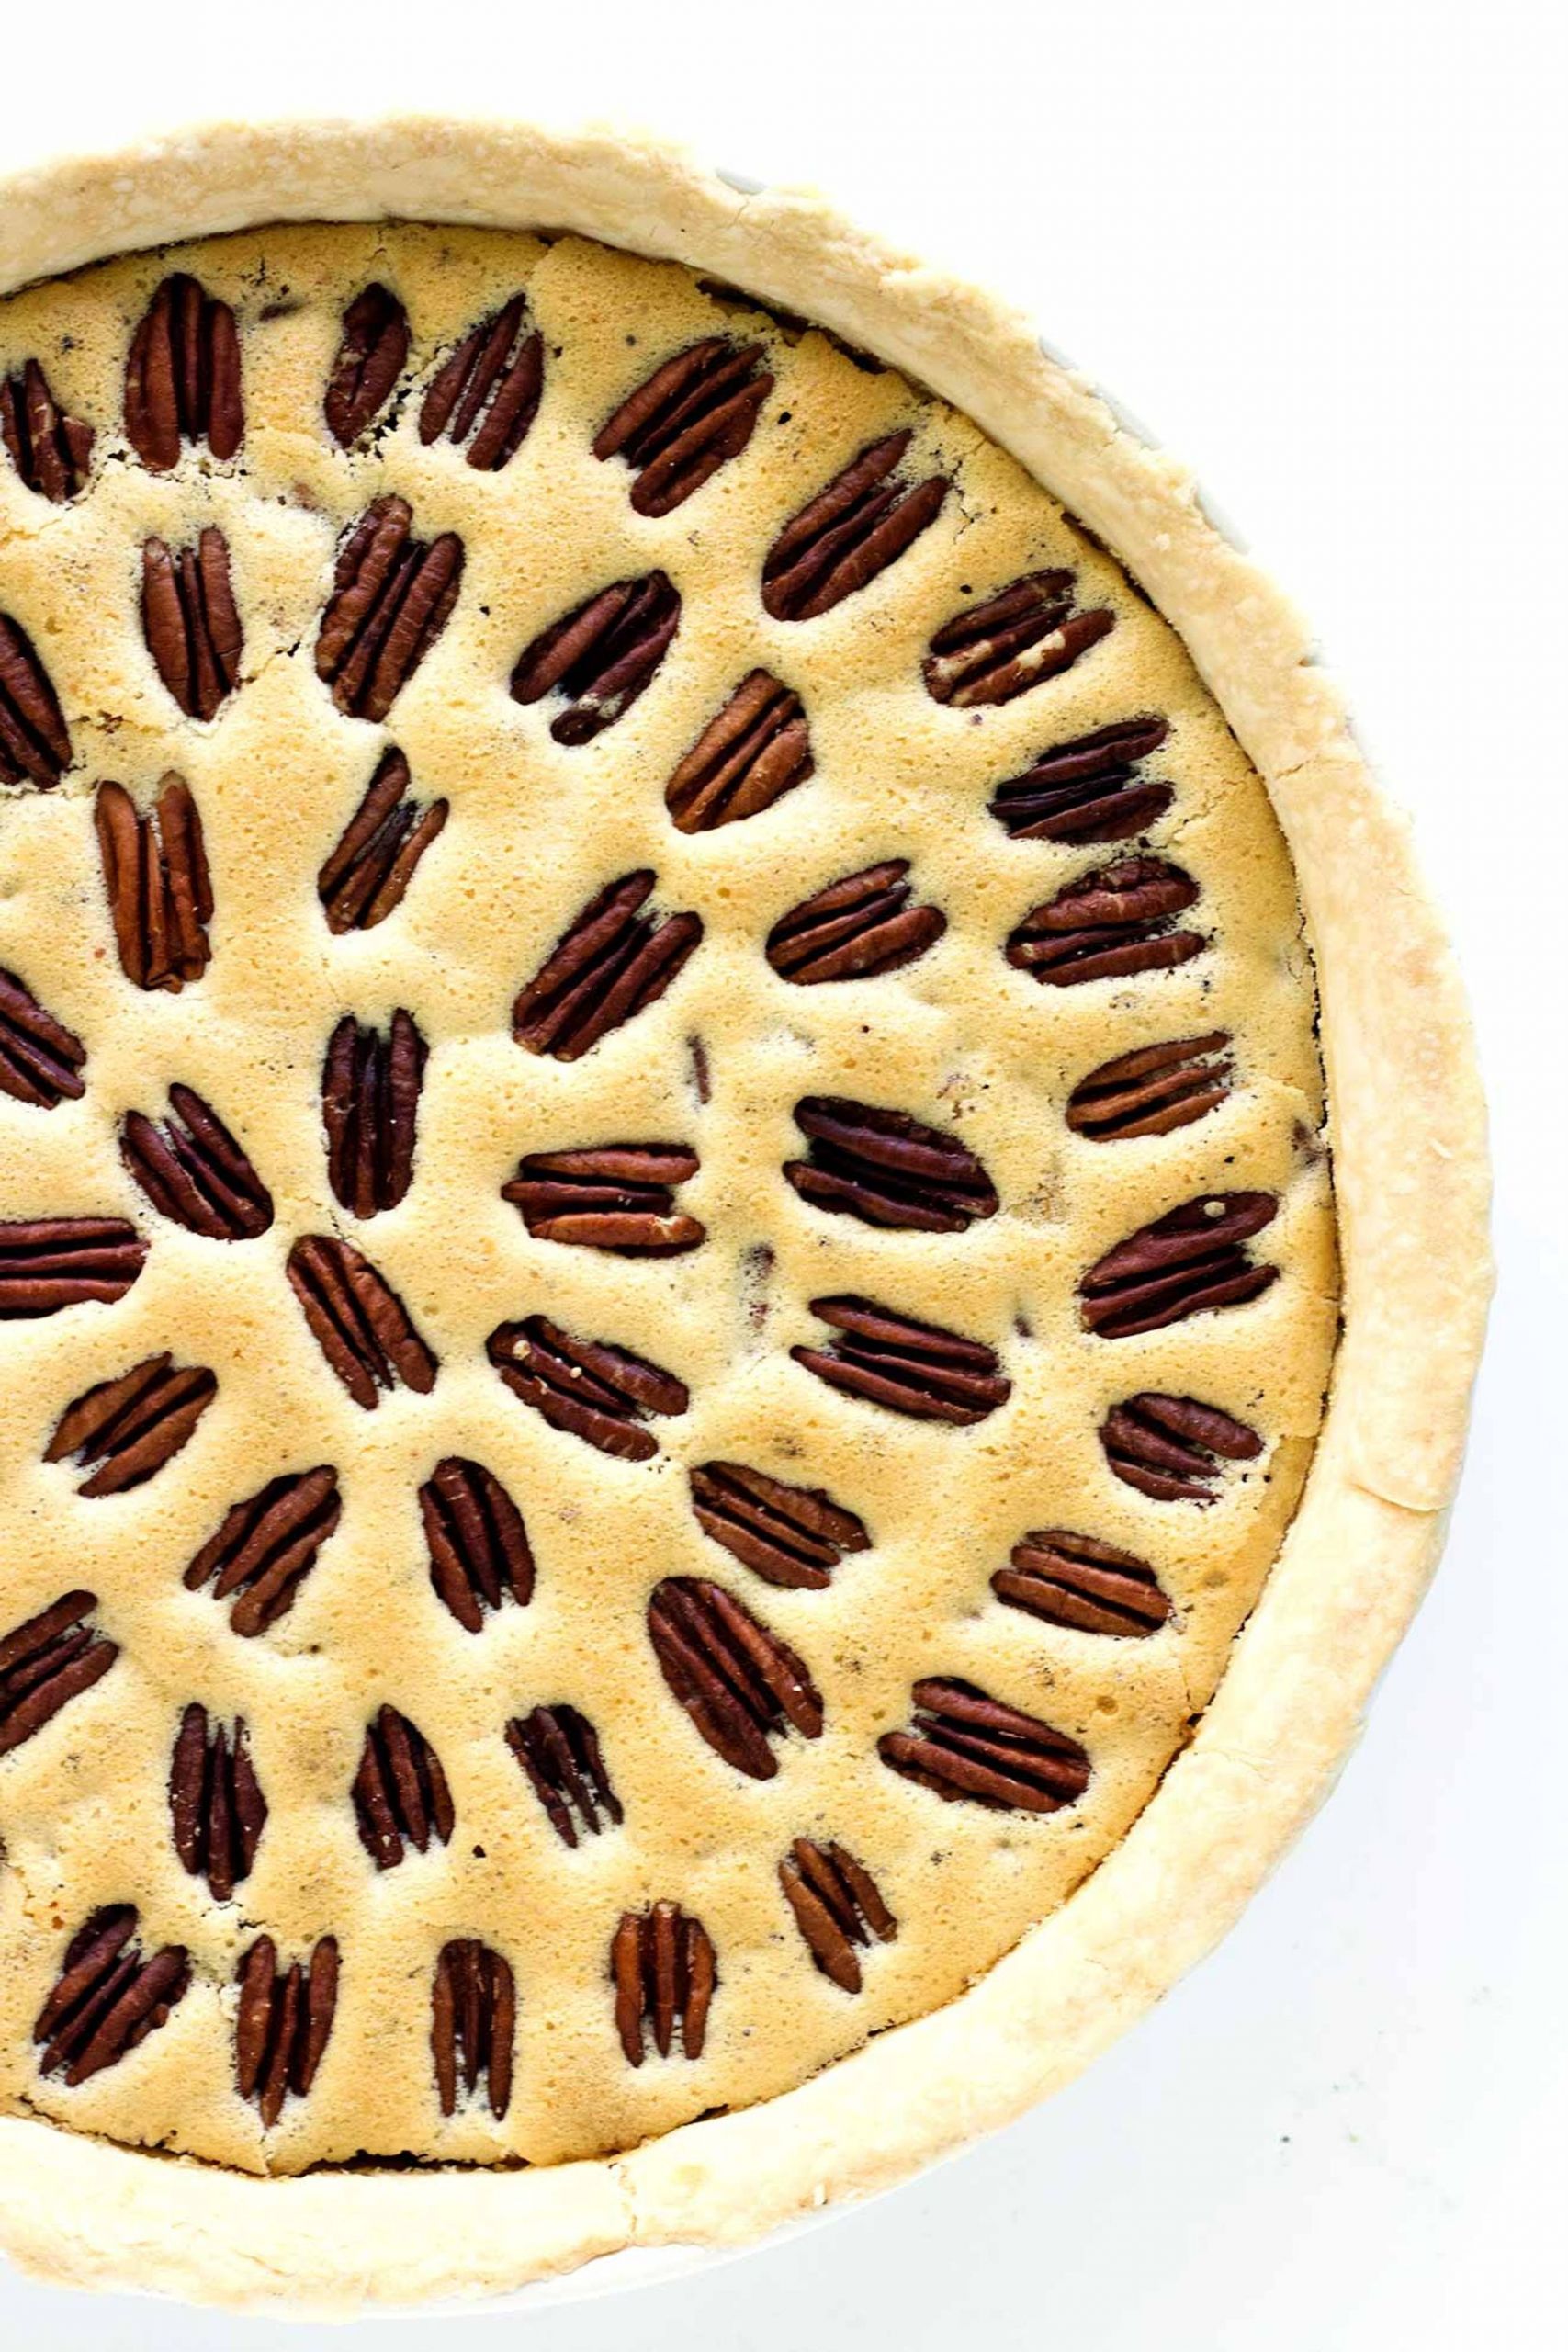 Pecan Pie Without Corn Syrup
 Quick and Easy Pecan Pie without Corn Syrup My Recipe